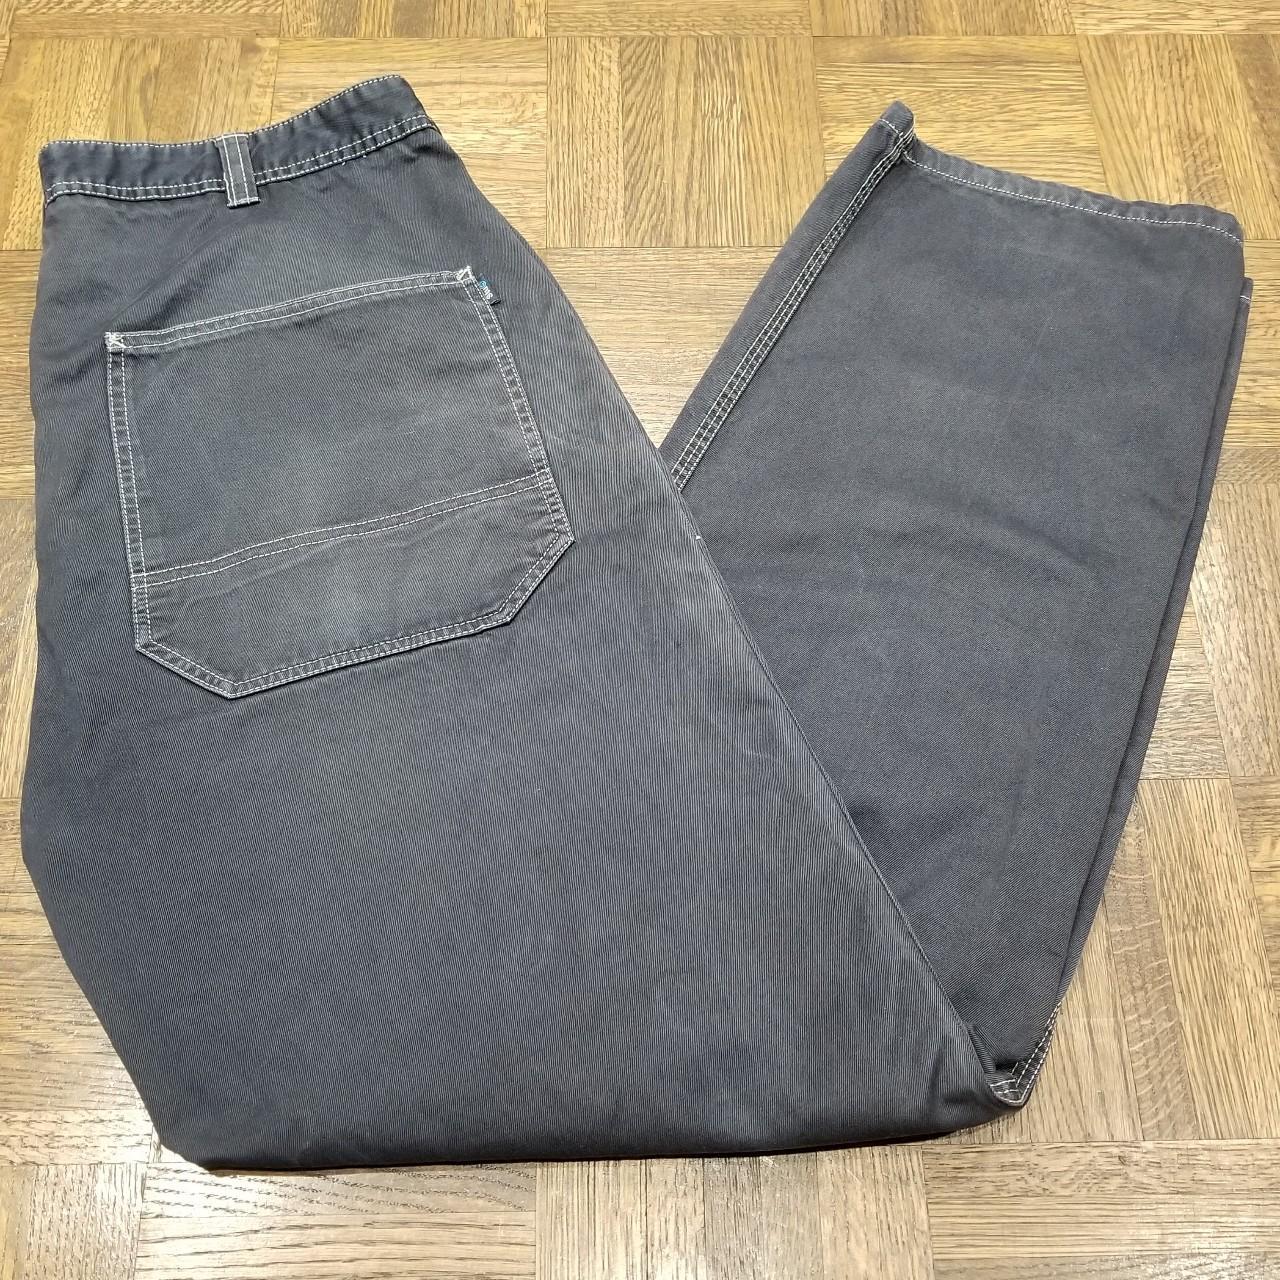 Vintage Stussy baggy pants in good condition with... - Depop